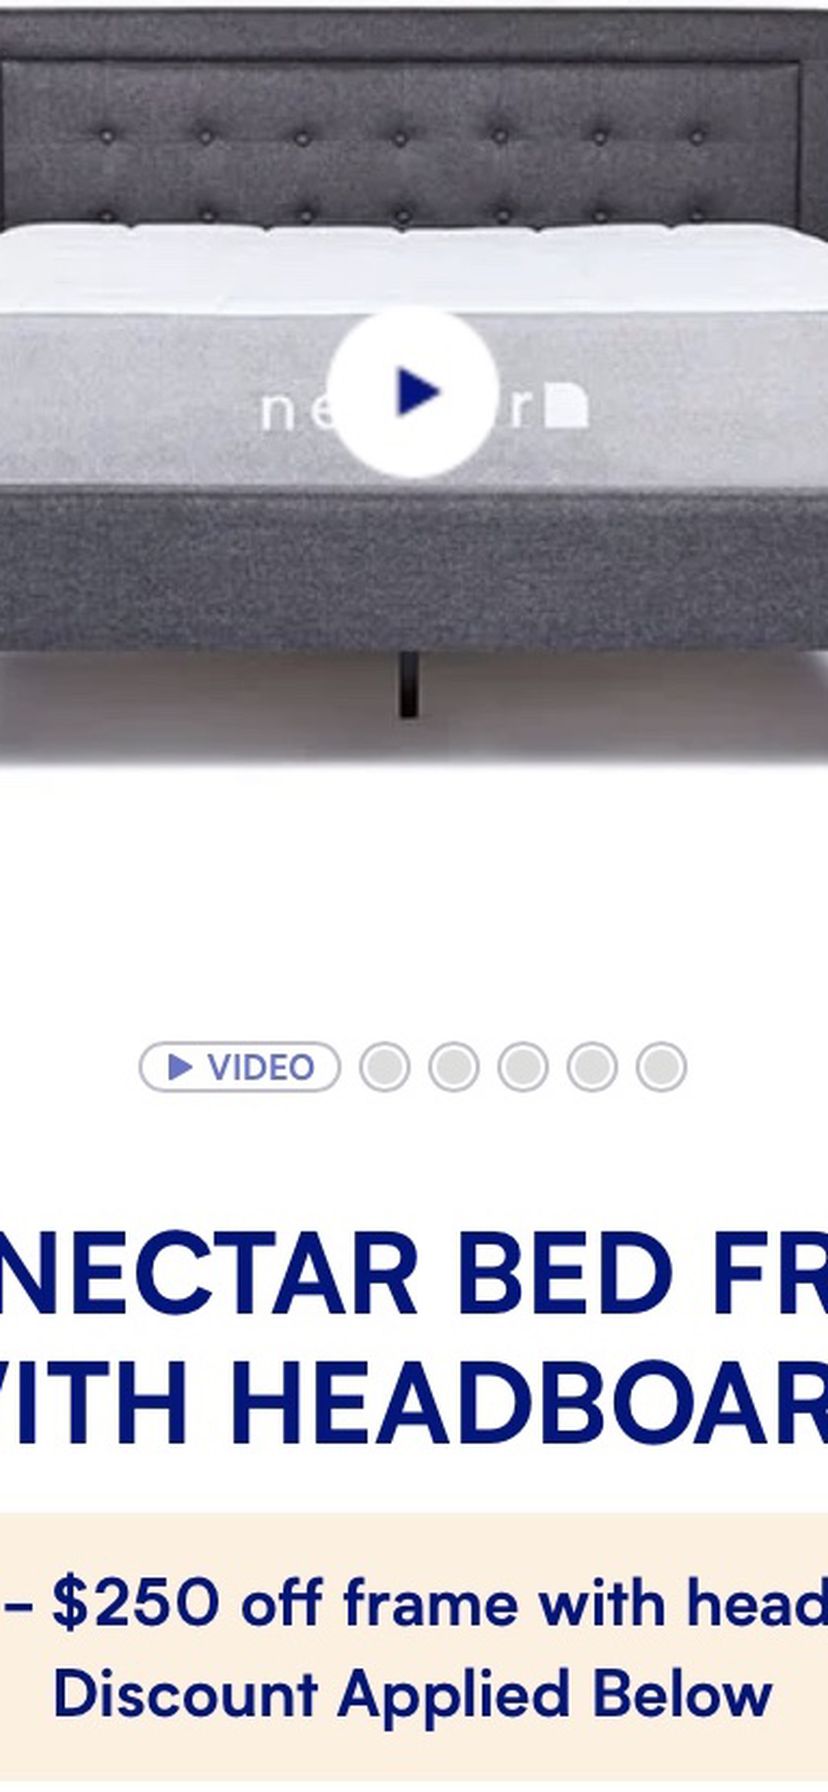 Nectar Bed Frame With Headboard